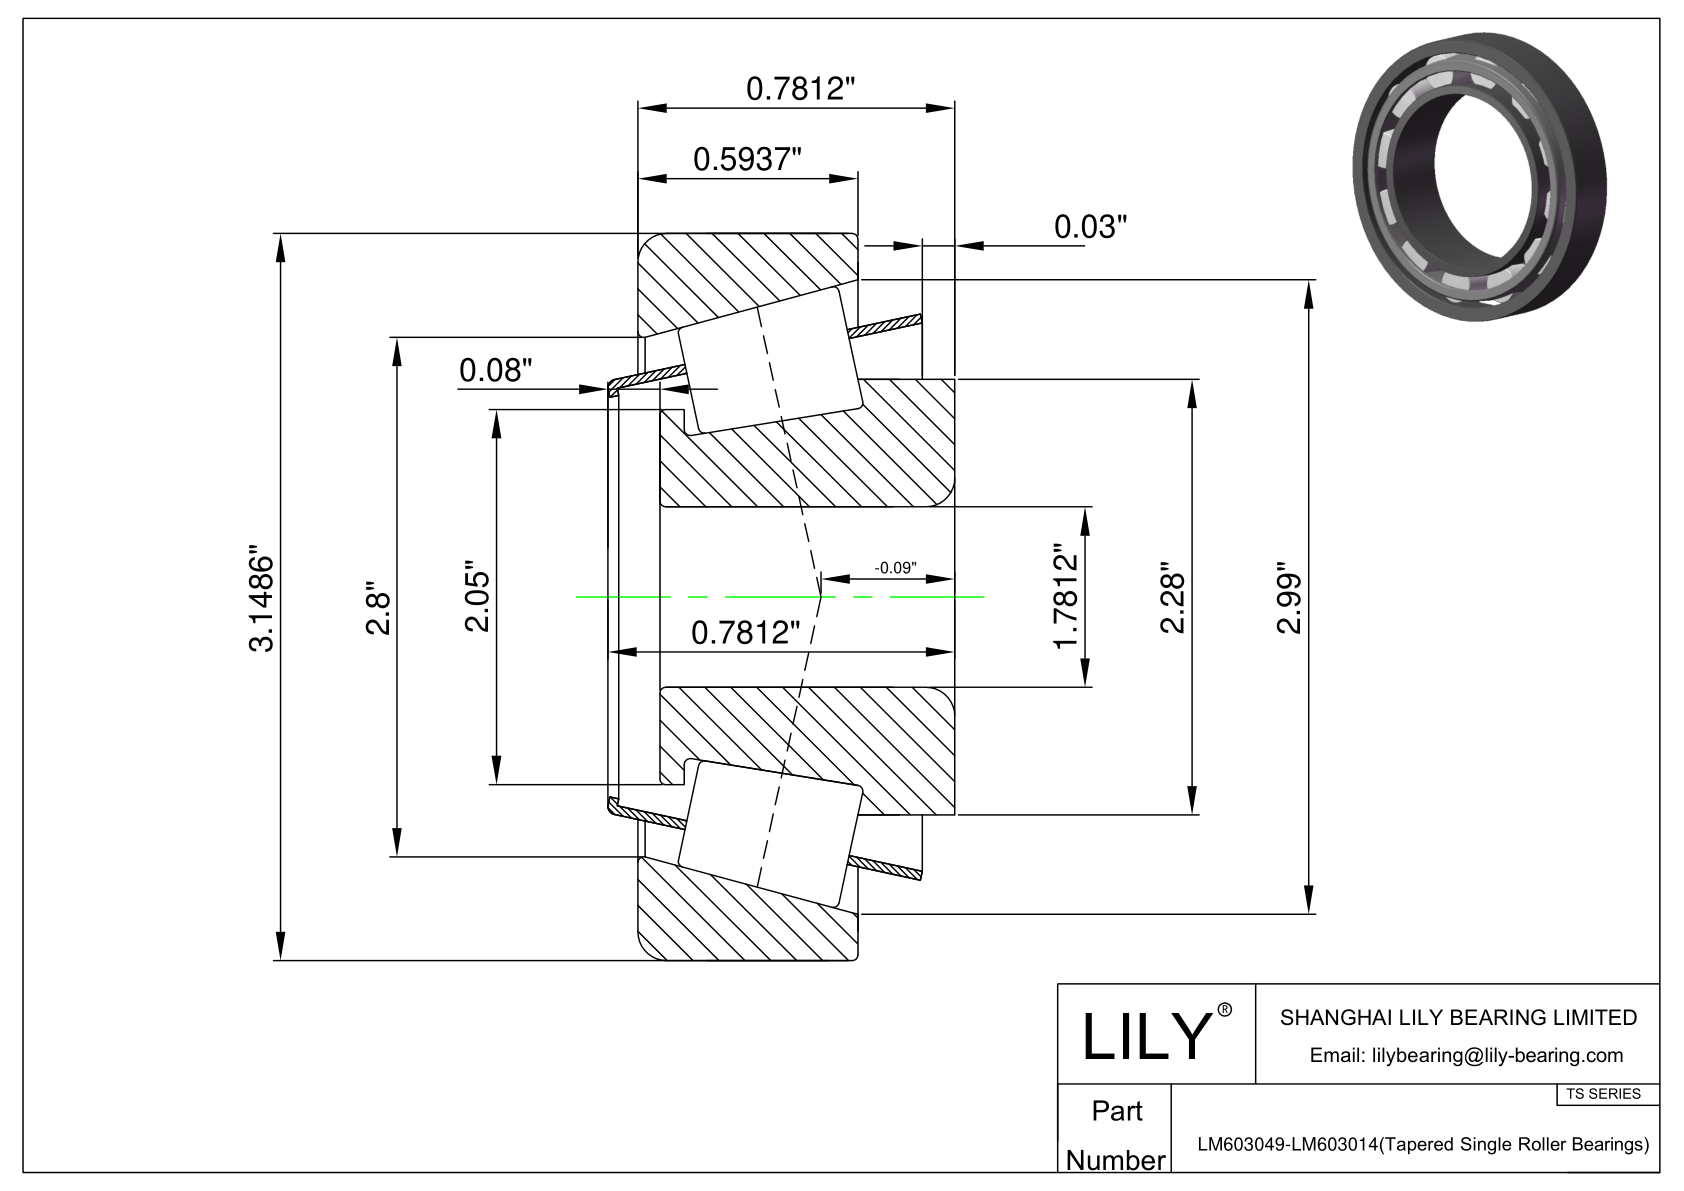 LM603049-LM603014 TS (Tapered Single Roller Bearings) (Imperial) cad drawing